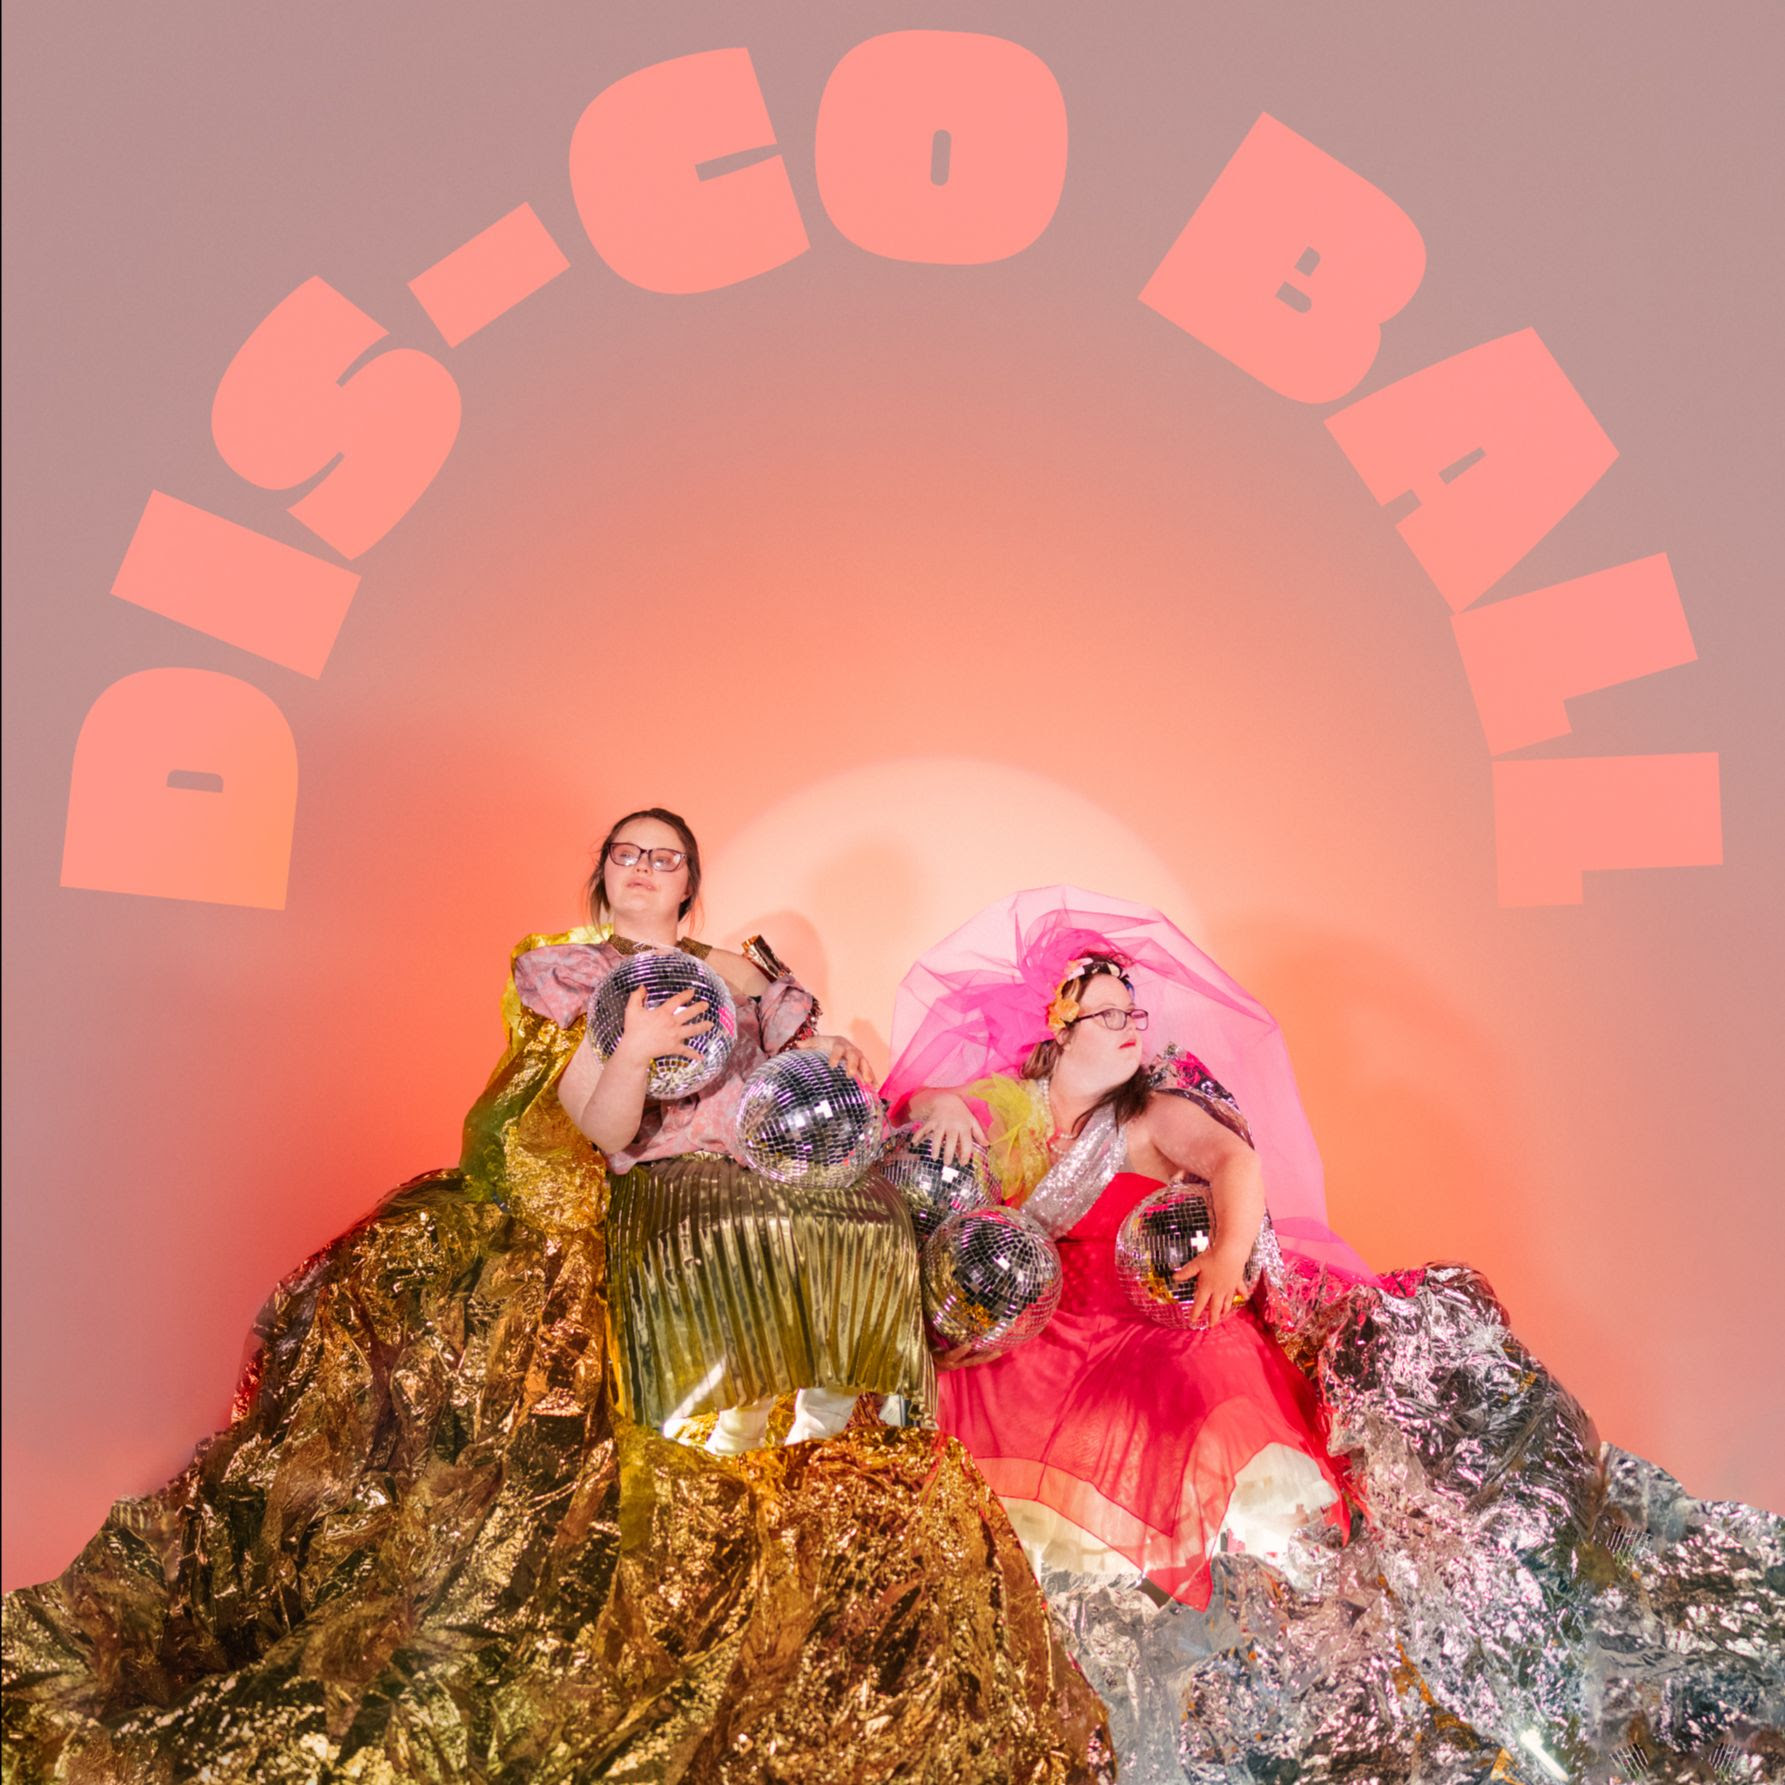 Book now for Sprung Dance Theatre’s Dis-Co Ball